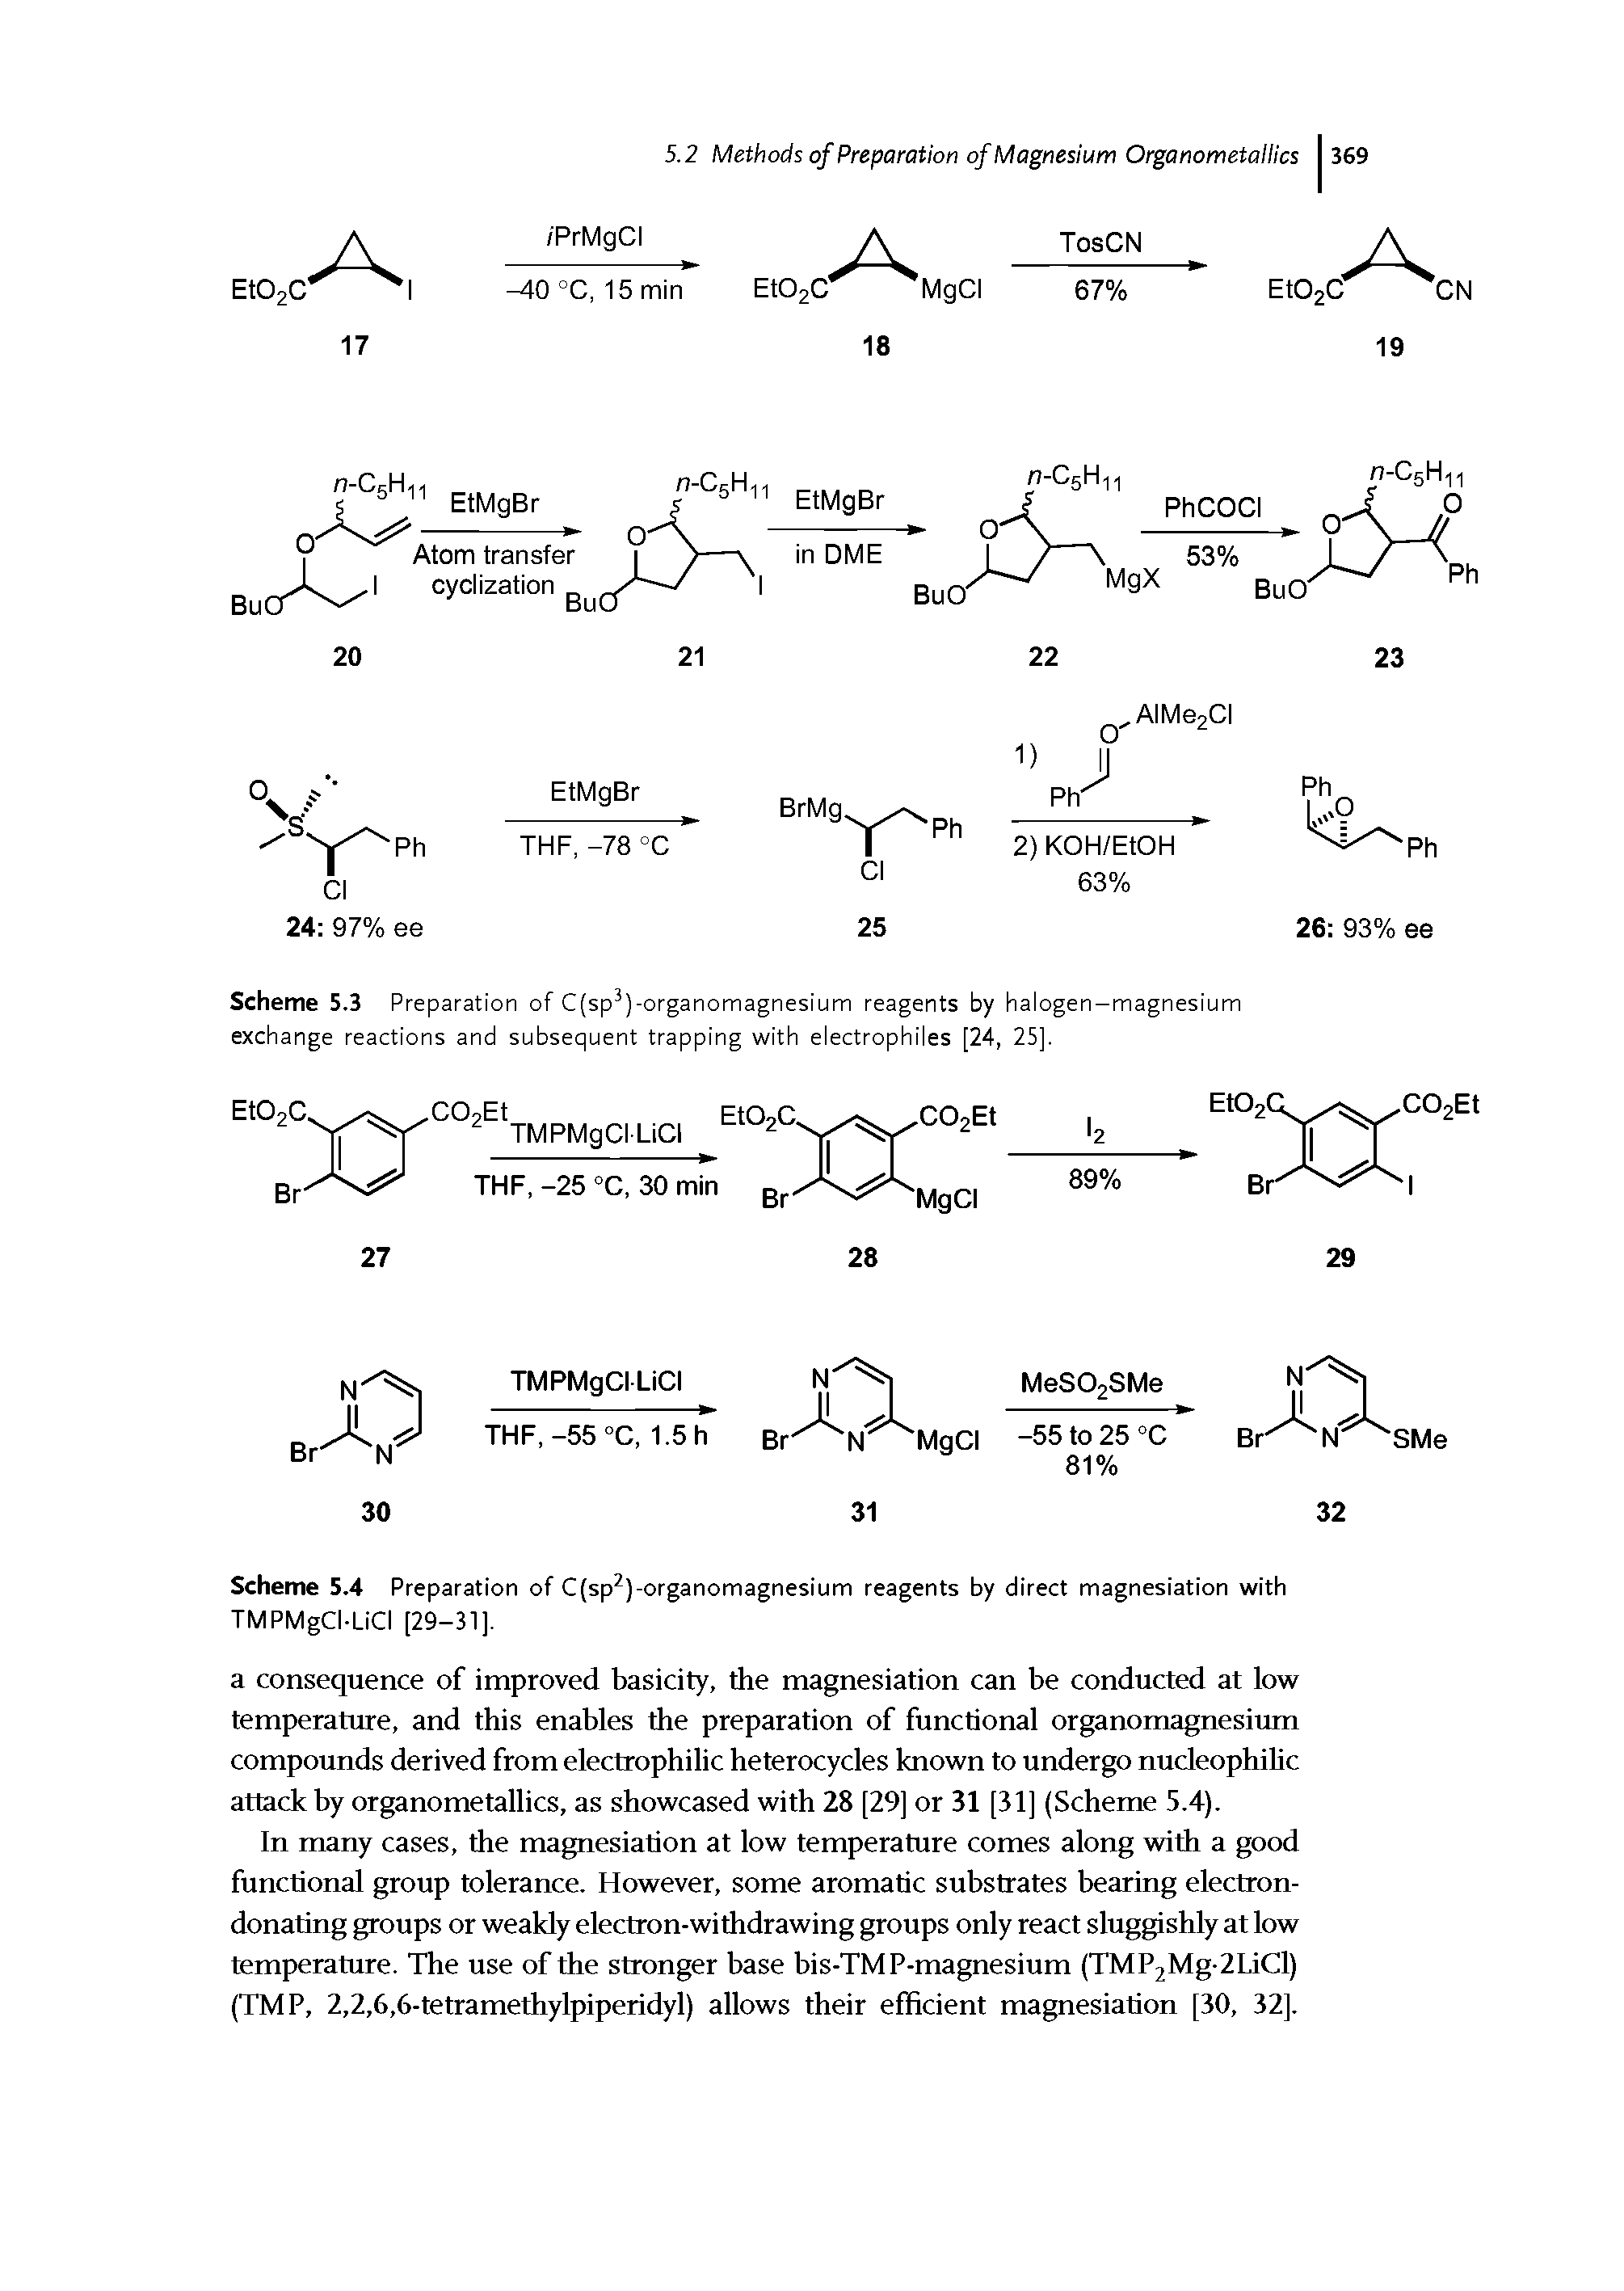 Scheme 5.4 Preparation of C(sp )-organomagnesium reagents by direct magnesiation with TMPMgCI-LiCI [29-31].